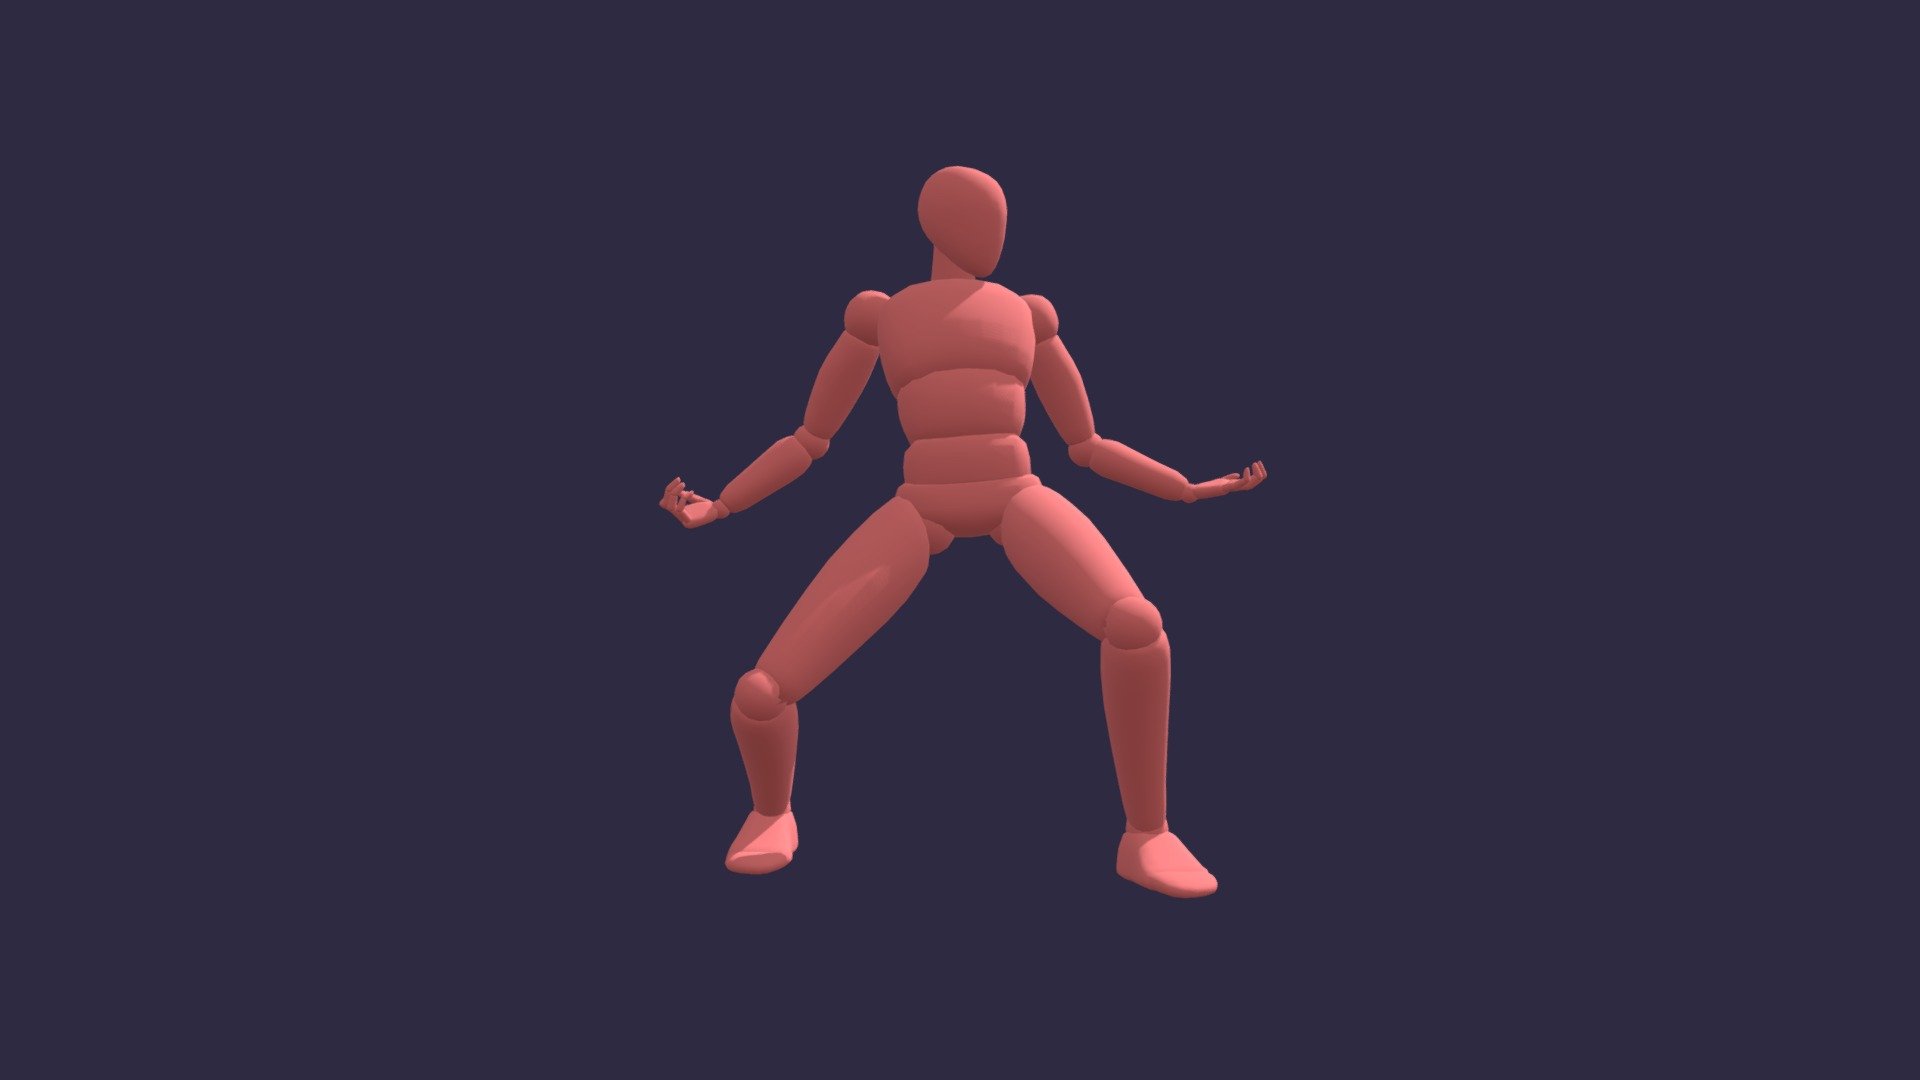 Kinetix enables avatar self-expression in 3D virtual worlds &amp; social media through a technology that covers the entire lifecycle from emote creation, to distribution, monetization &amp; sharing. Emotes are animations that express avatars' emotions like dances, gestures &amp; celebrations.

This premium emote pack includes 10 high-quality &ldquo;taunt